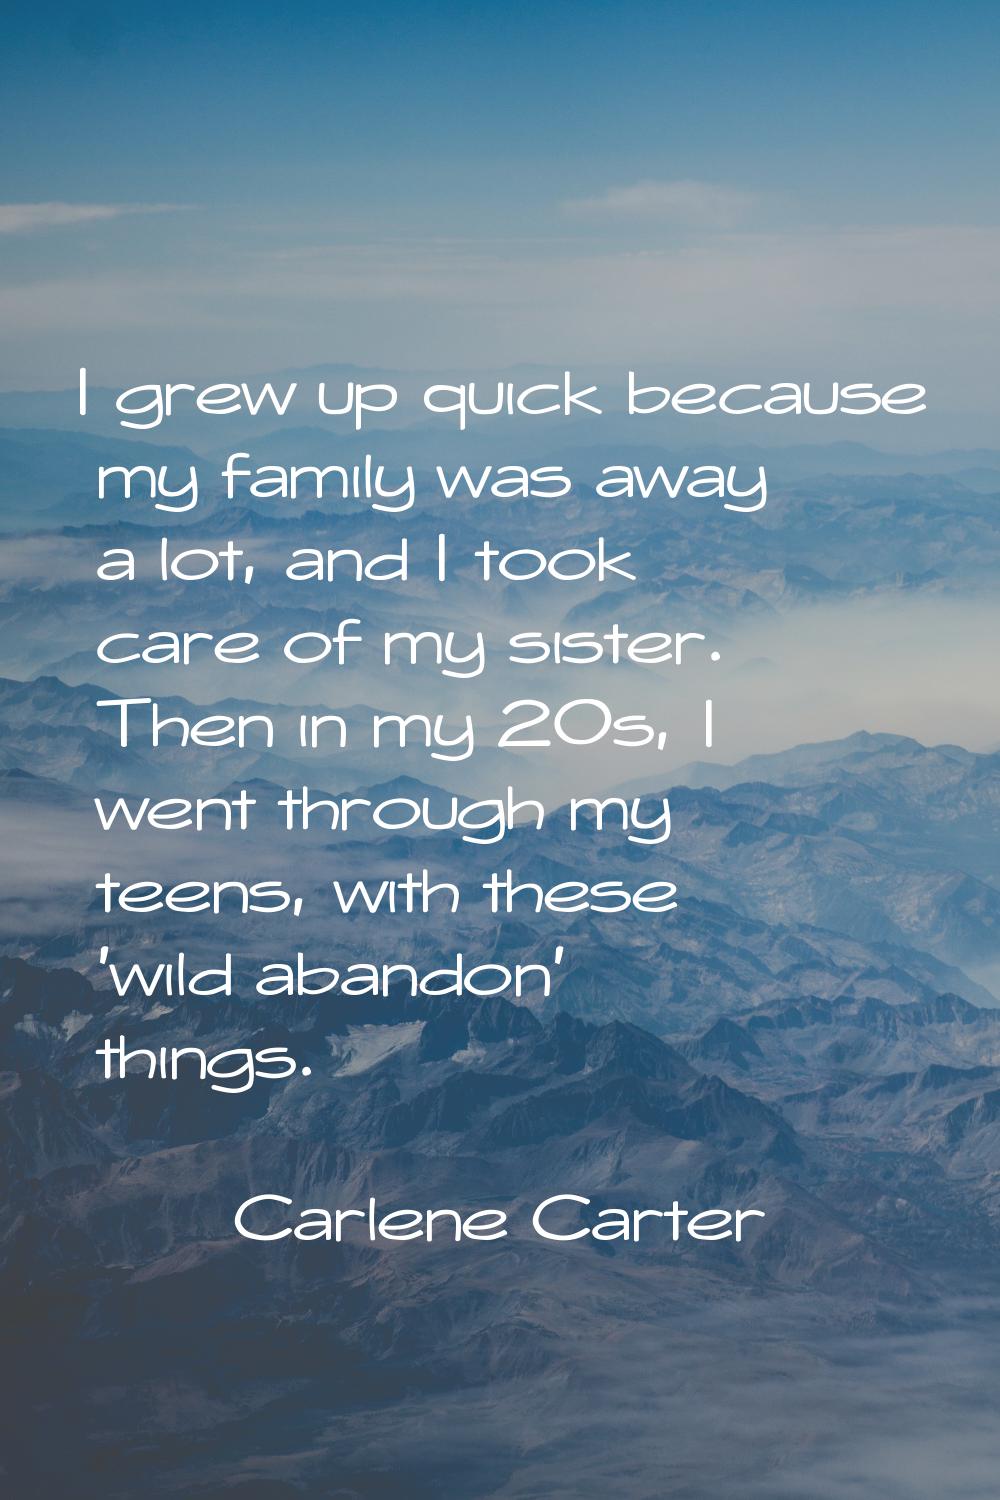 I grew up quick because my family was away a lot, and I took care of my sister. Then in my 20s, I w